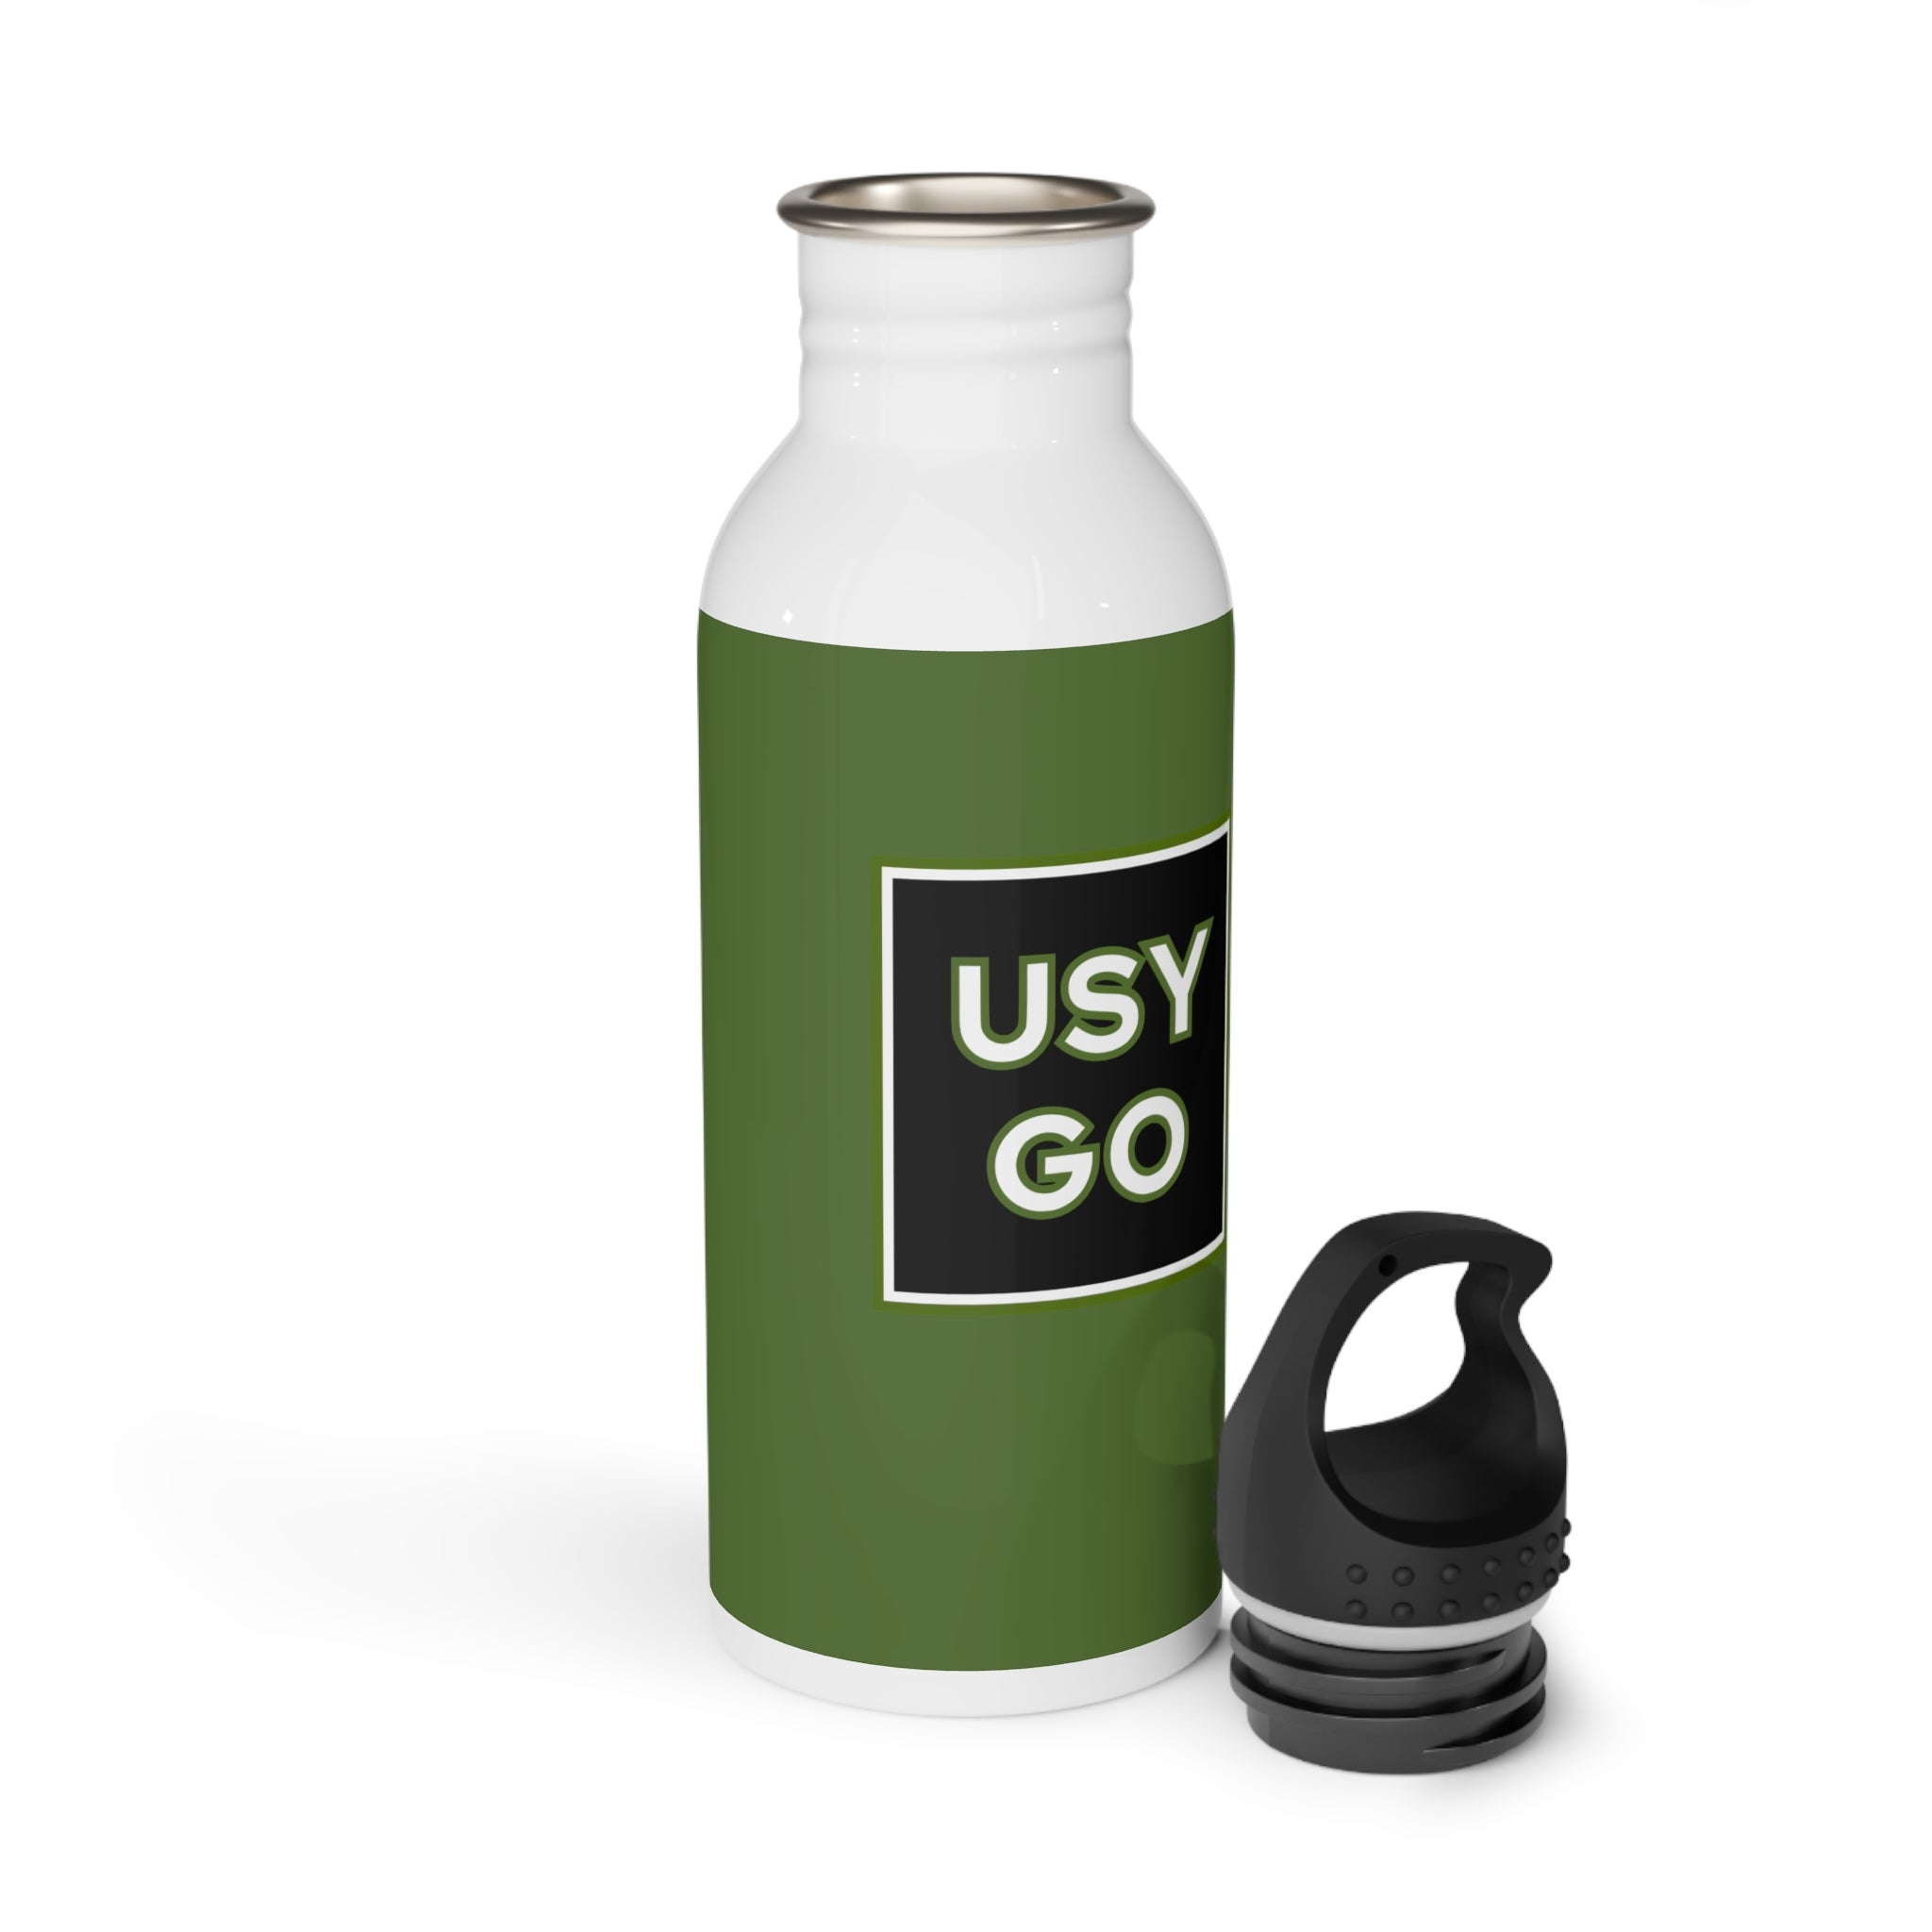 White and Green USYGO Stainless Water Bottle